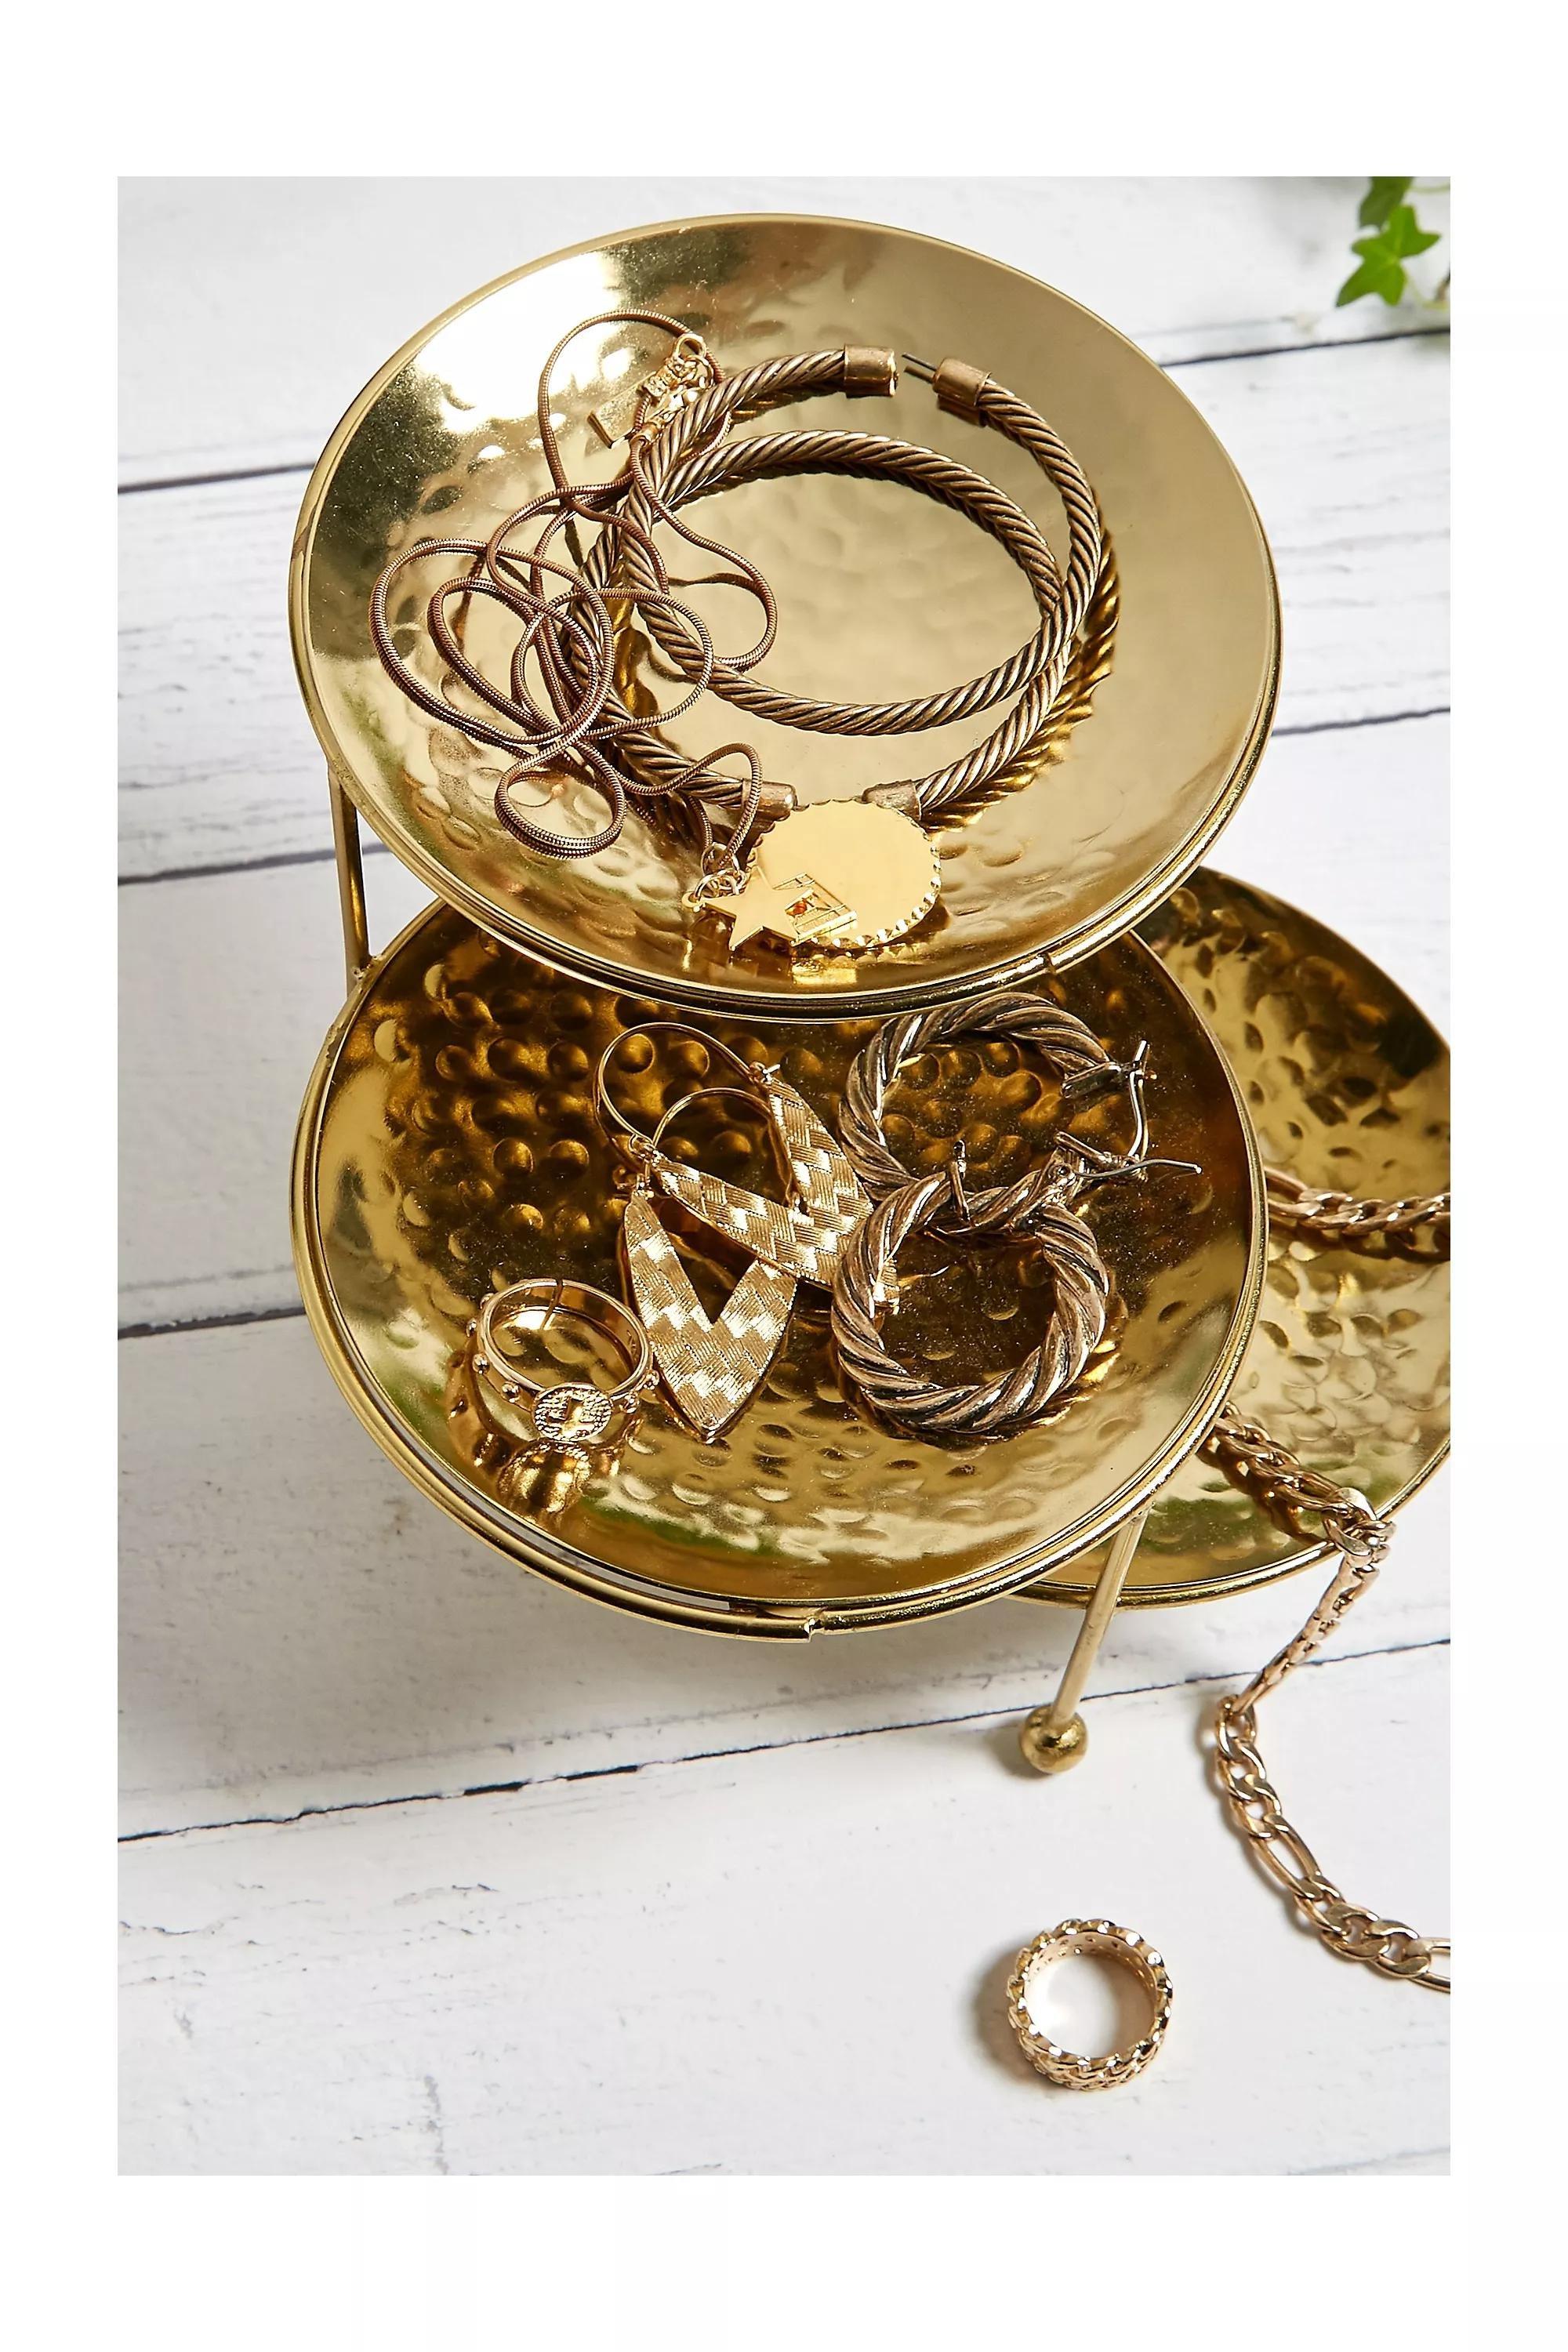 Urban Outfitters - Gold Tiered Trinket Dish